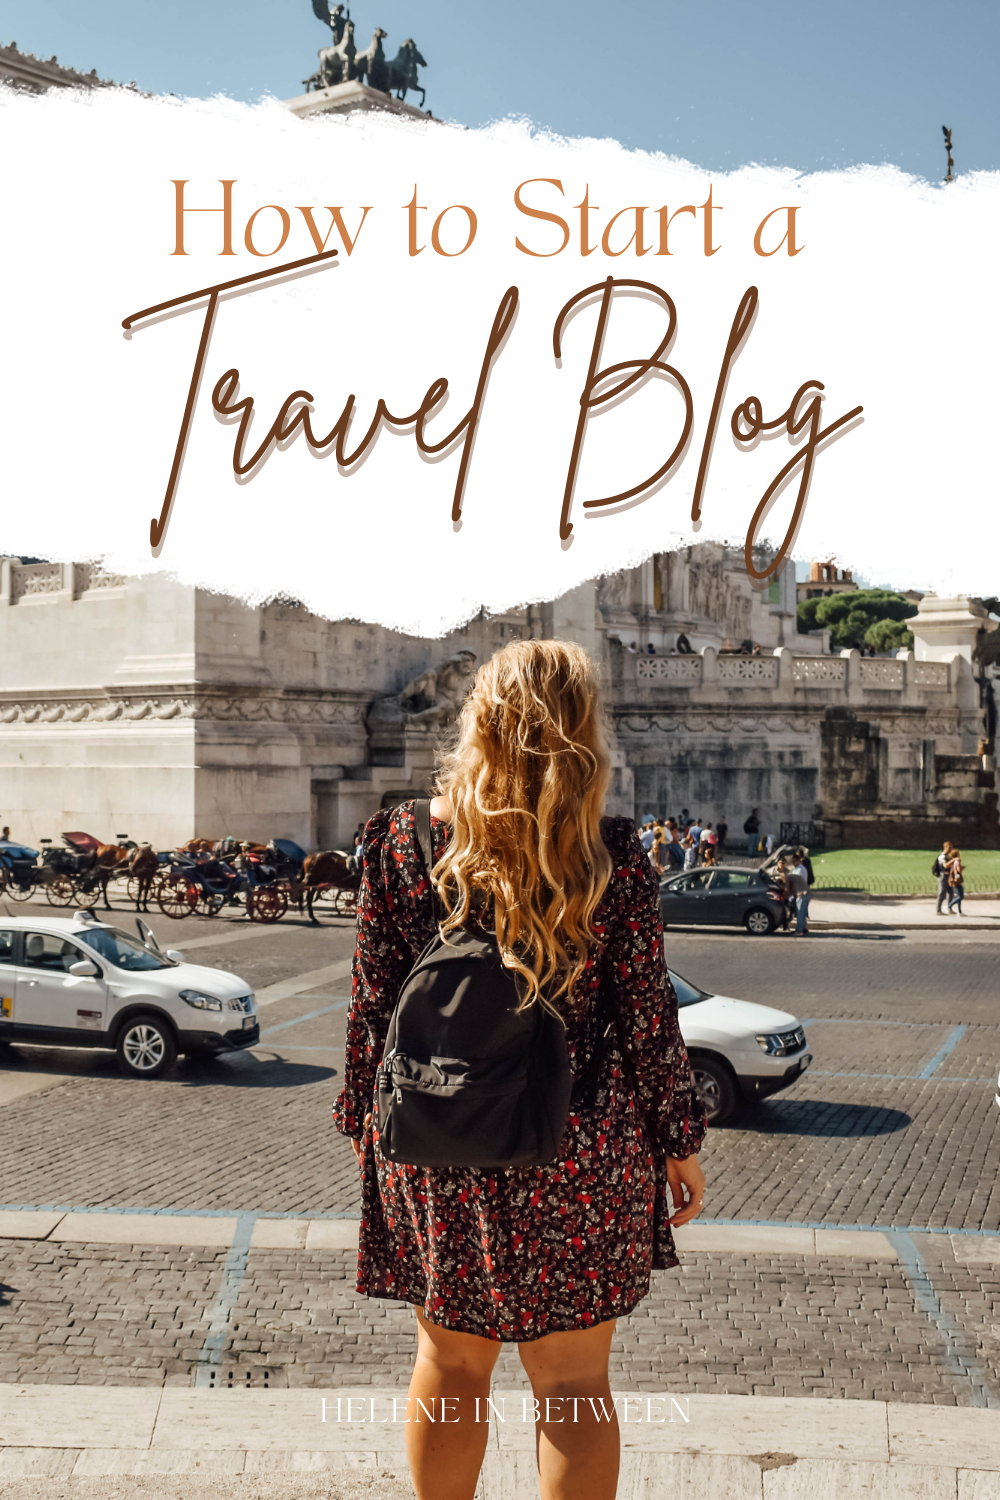 Travel Bloggers recommend their FAVORITE TRAVEL BOOKS